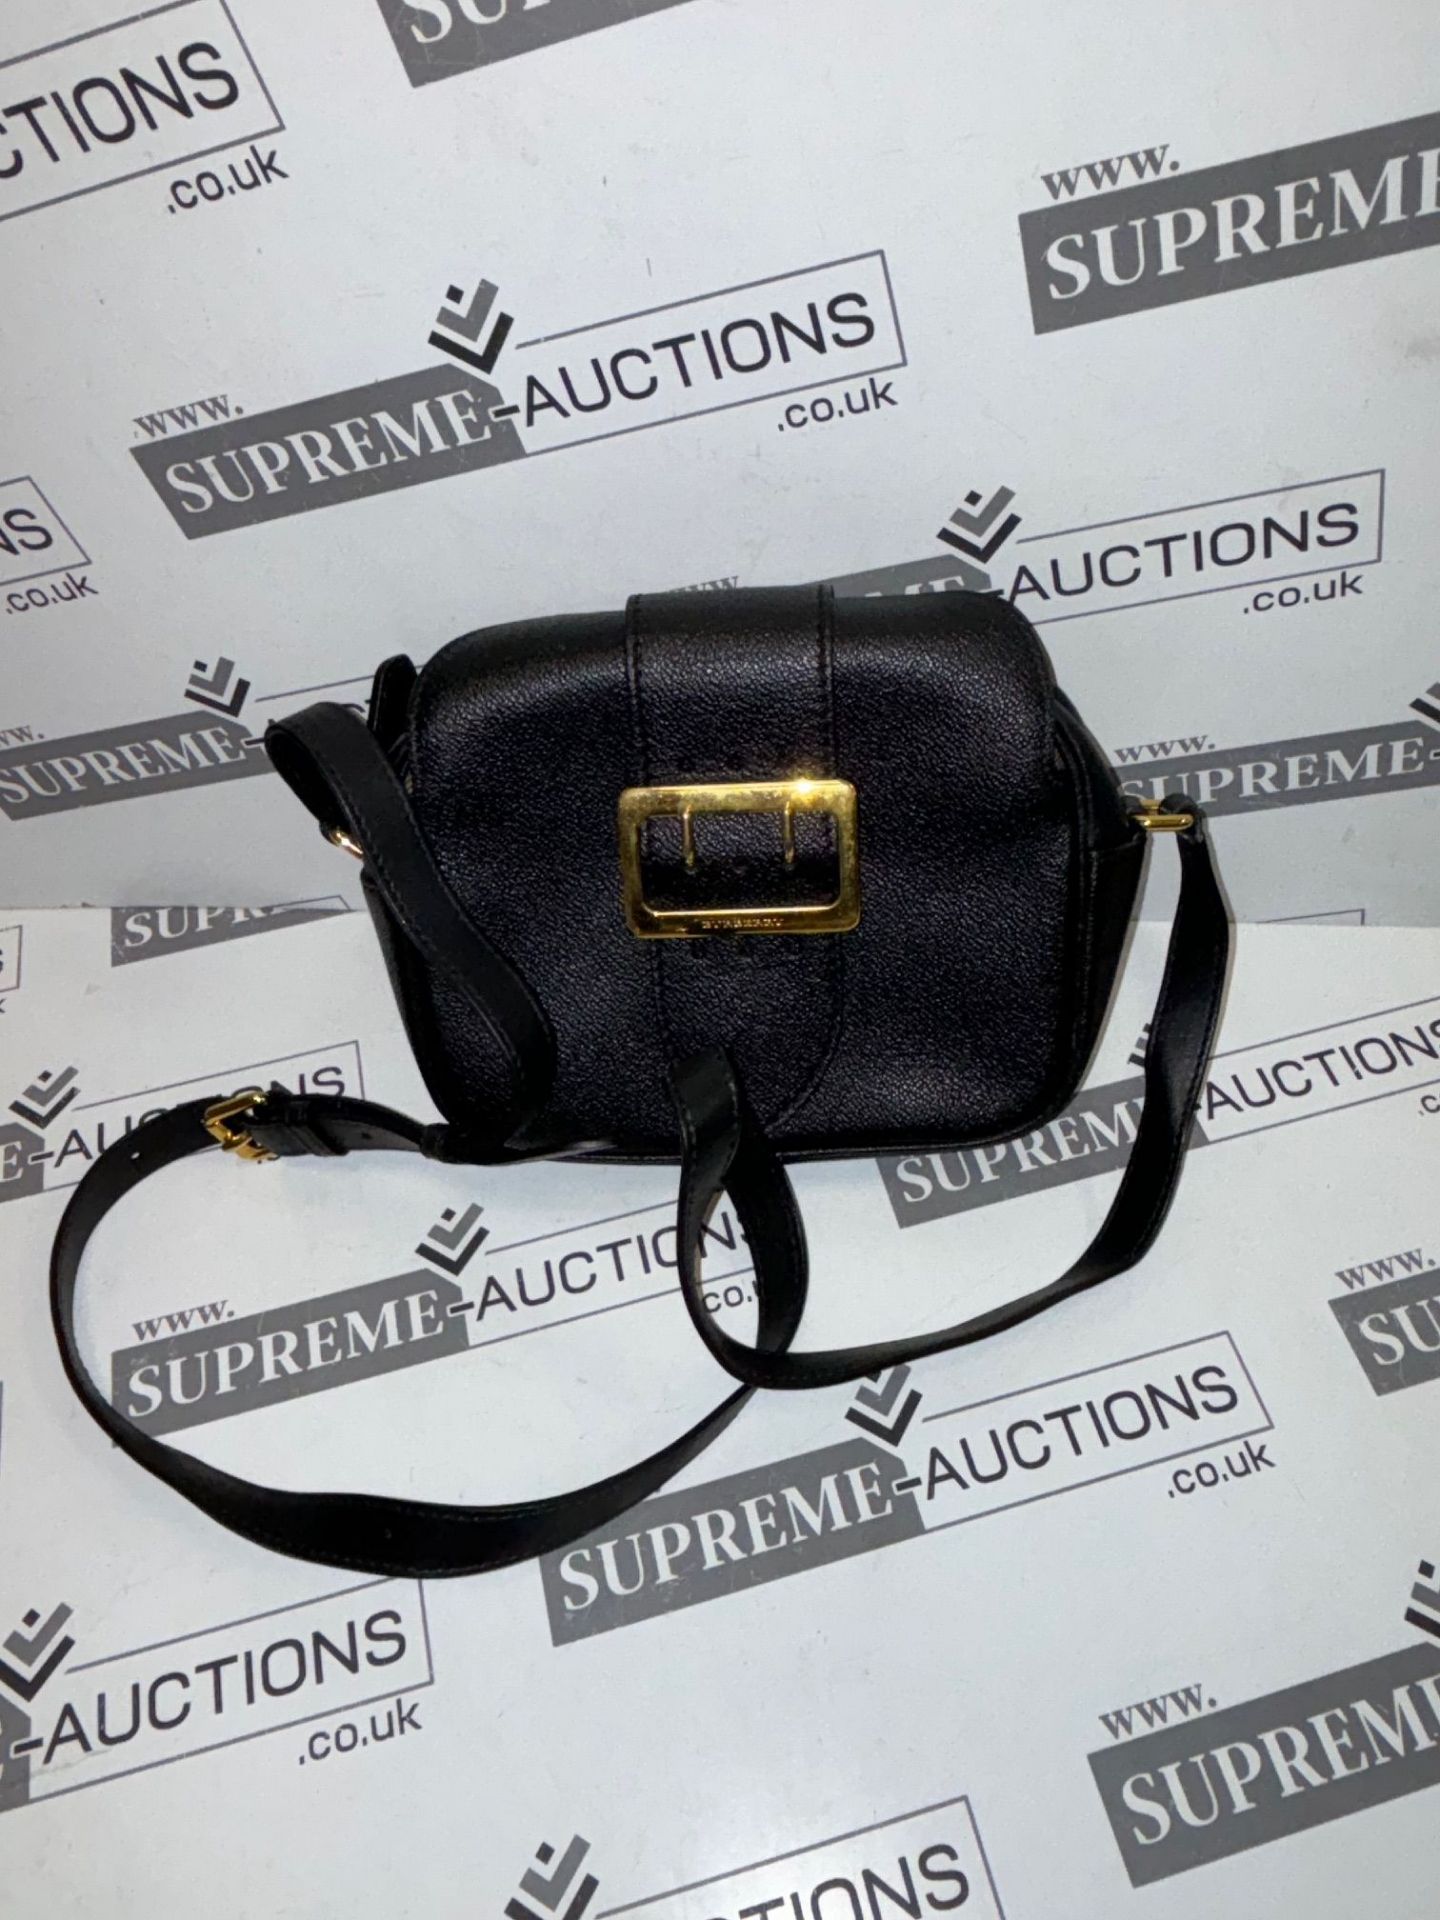 Burberry The Small Leather Buckle Bag in Black 20x18cm. (10.21) - Image 4 of 11